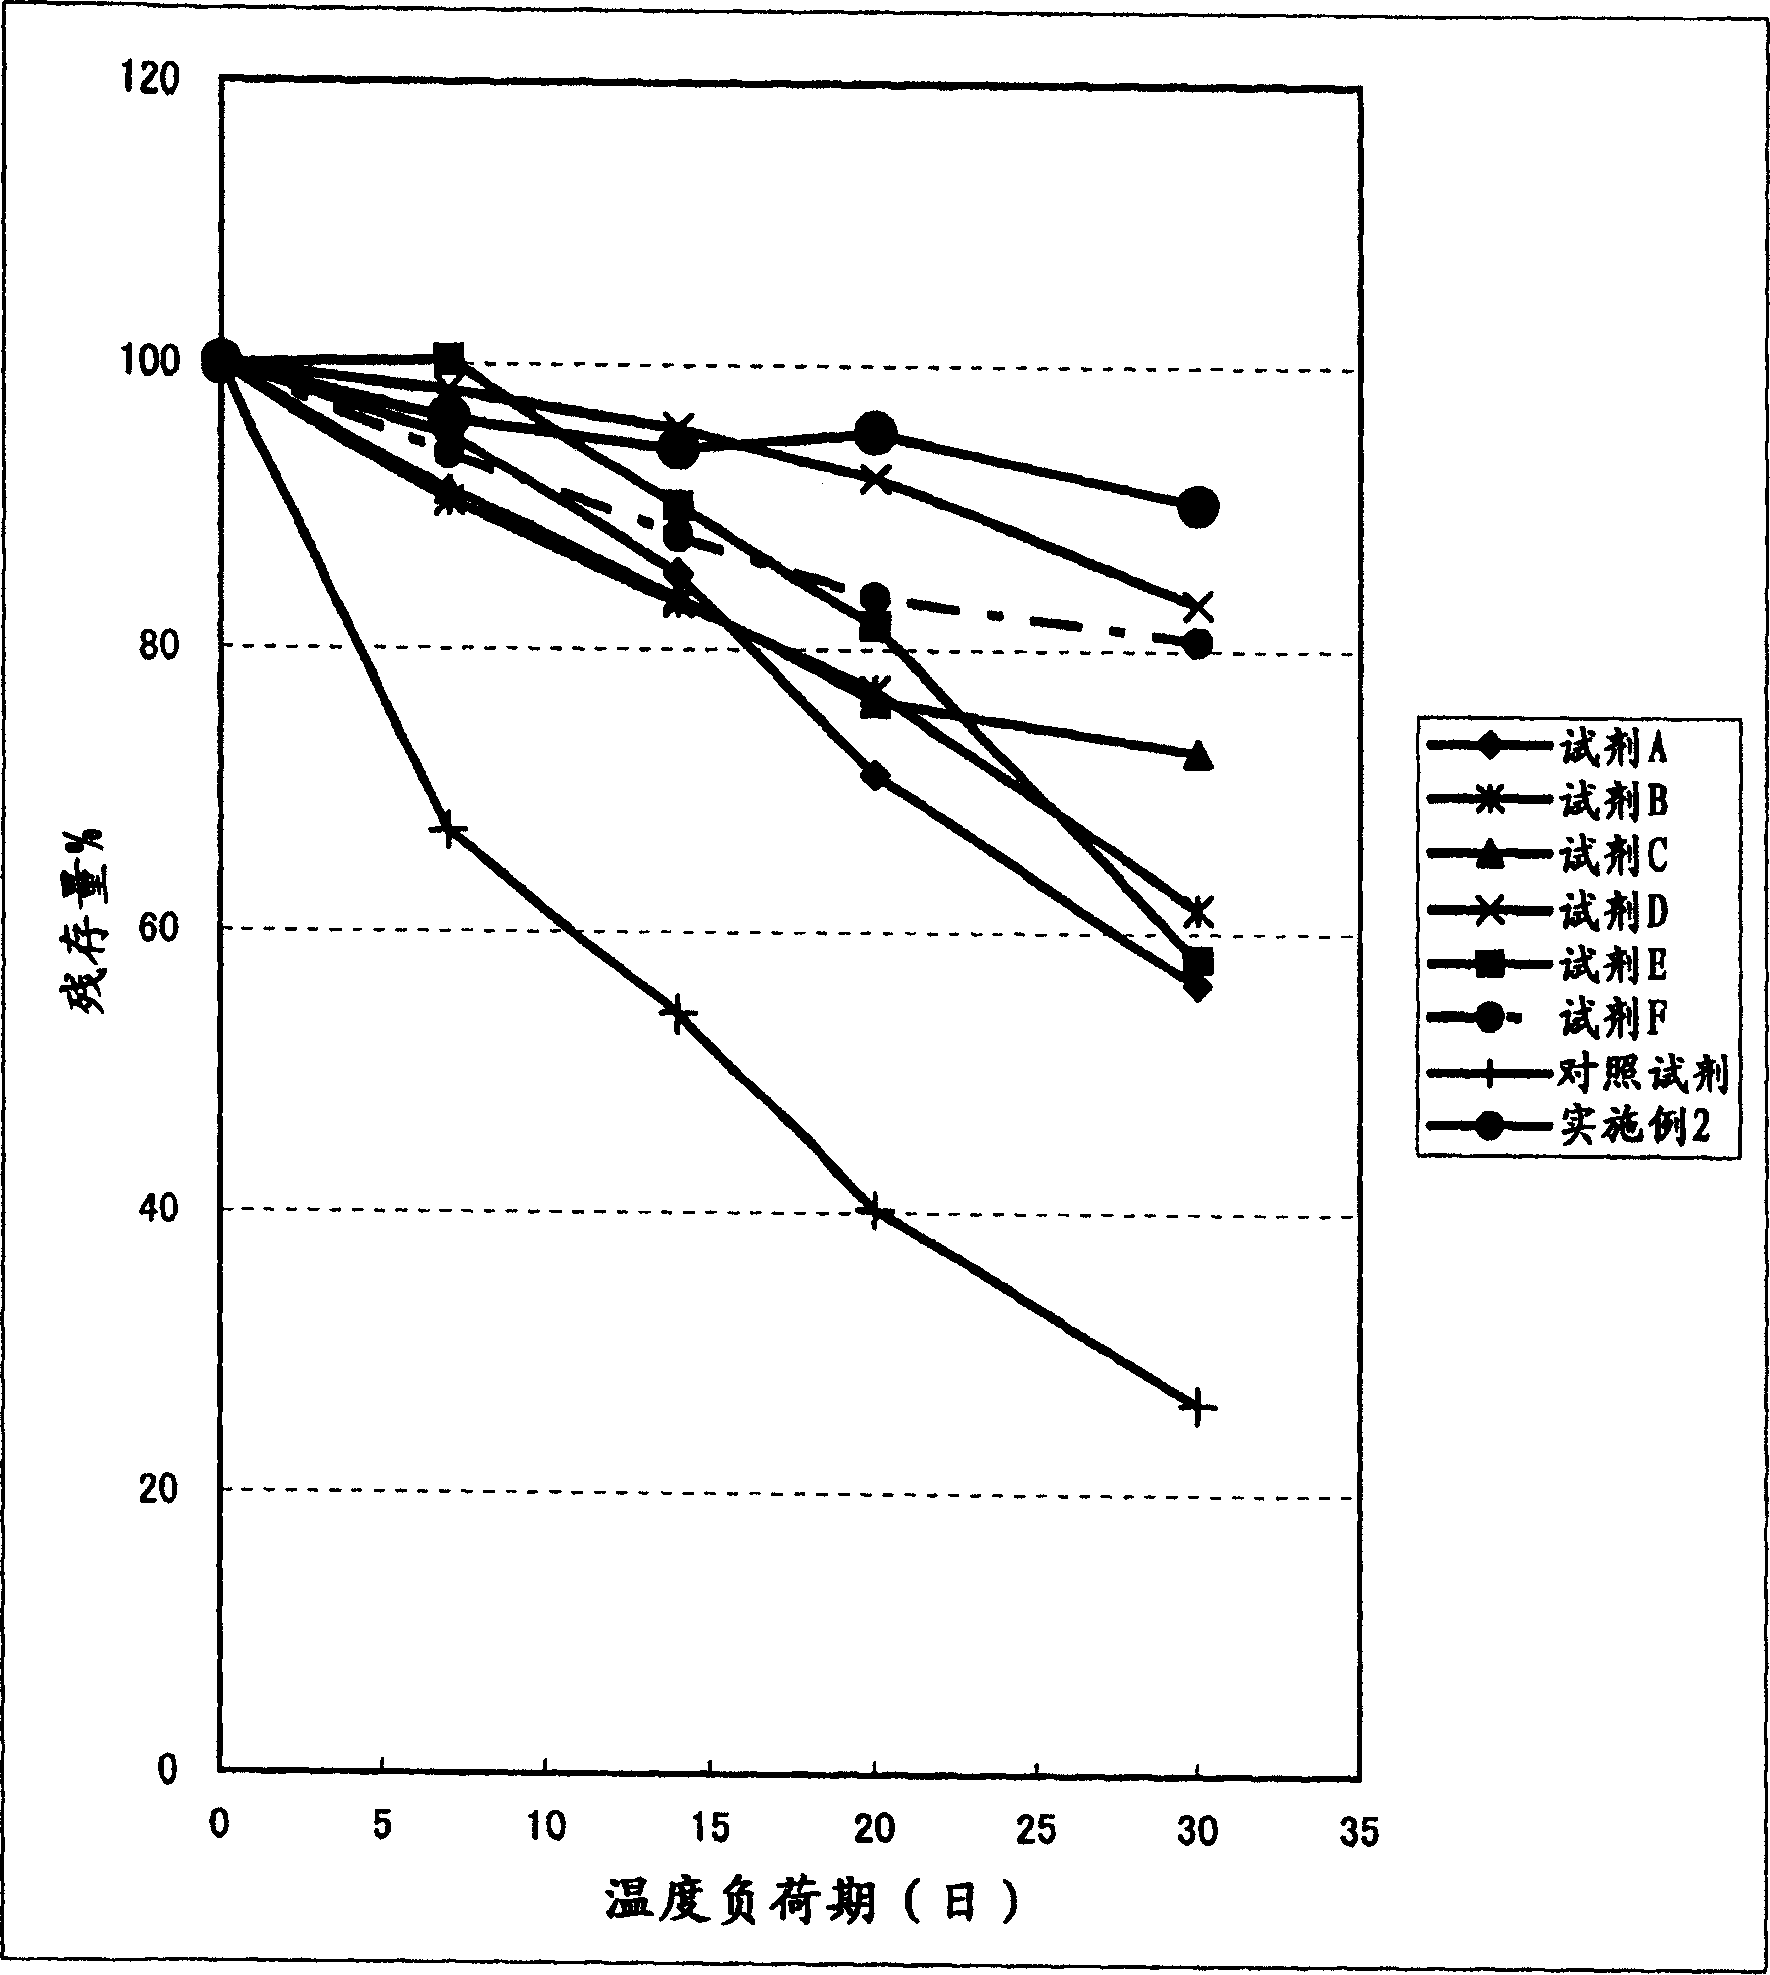 Clinical diagnostic reagent comprising glucose 6-phosphate dehydrogenase (G6PDH), method for stabilizing G6PDH, and use of a stabilizer for g6pdh